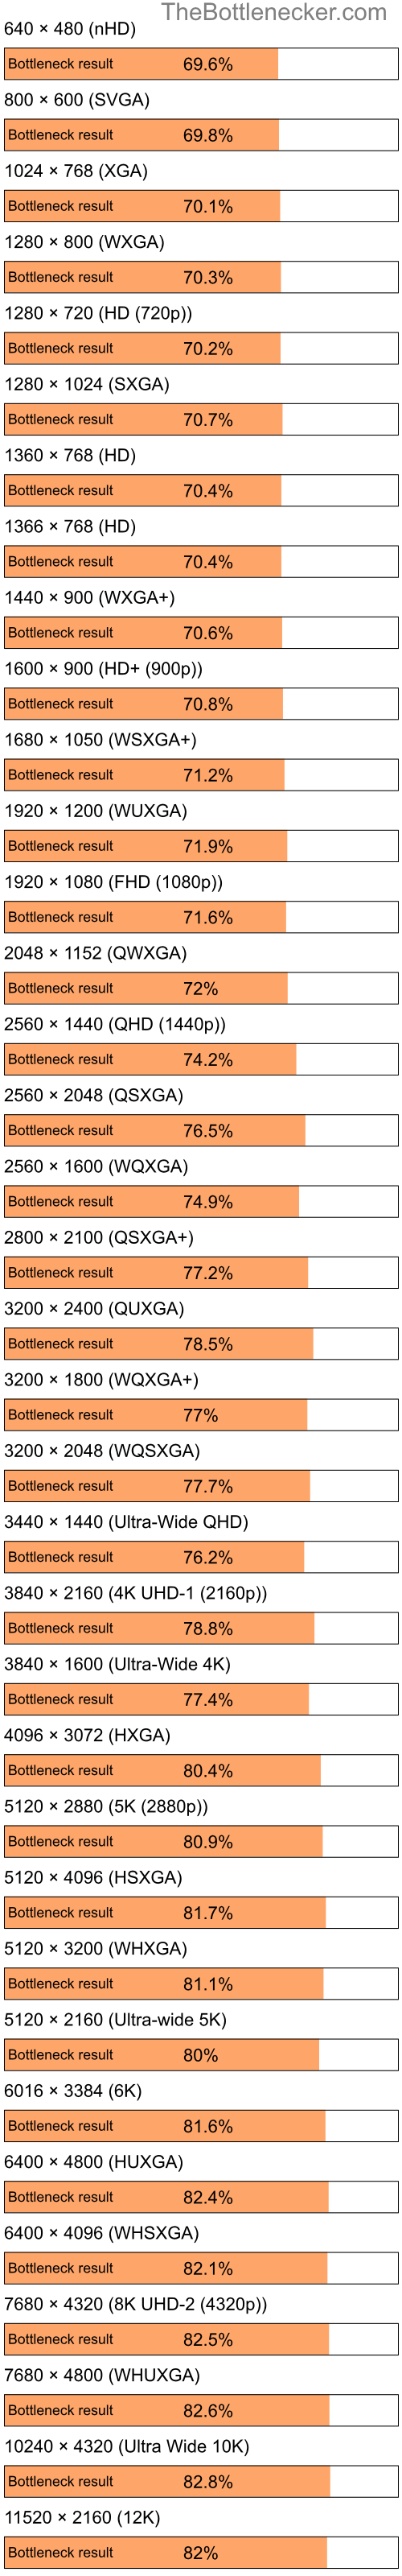 Bottleneck results by resolution for Intel Celeron M 420 and AMD Radeon HD 6290 in Graphic Card Intense Tasks